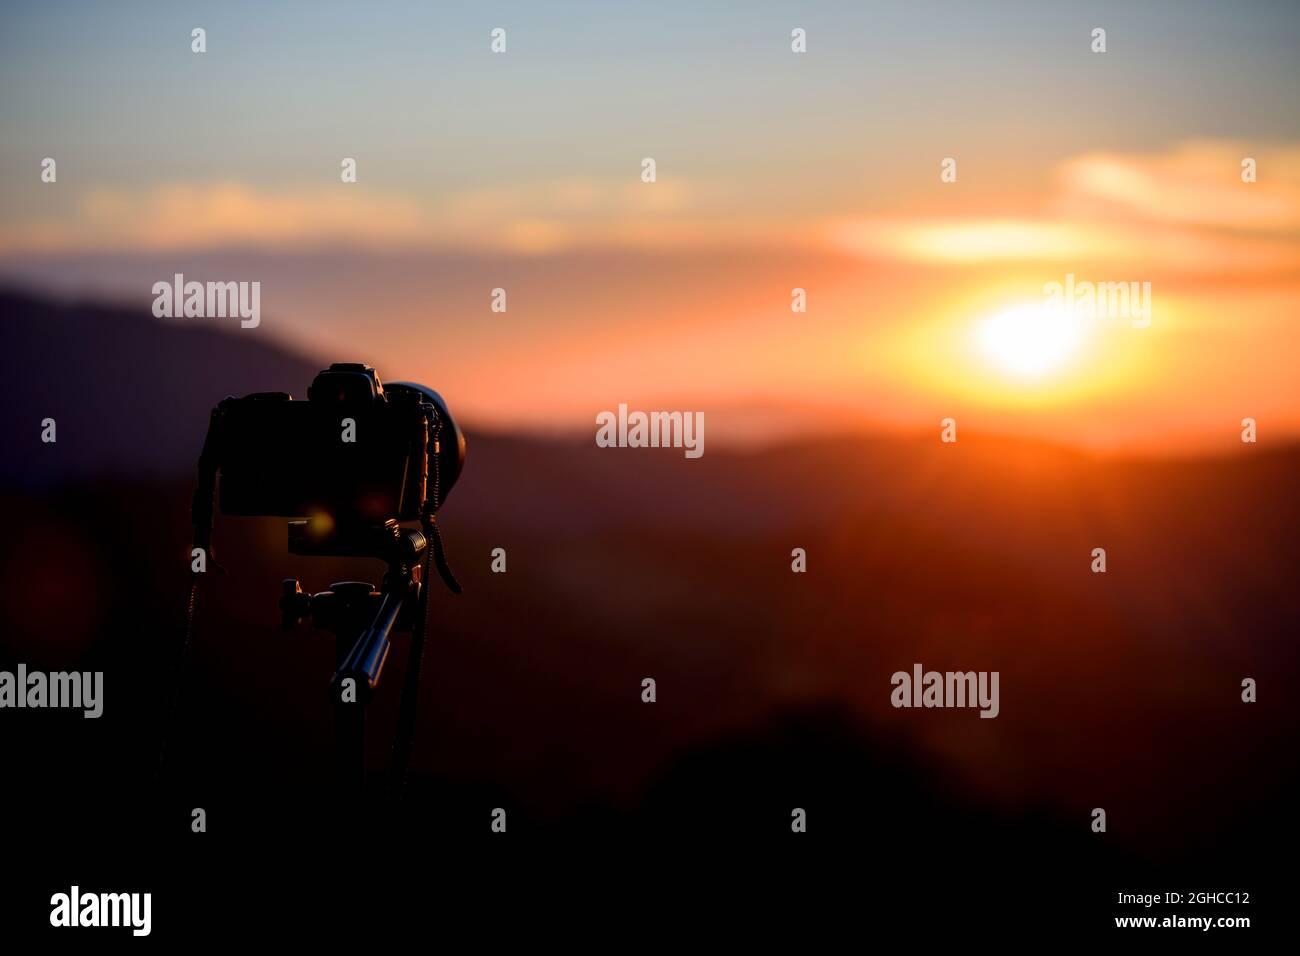 Camera on tripod and photography view with blurred focus mountain landscape. Sunset or sunrise light Stock Photo